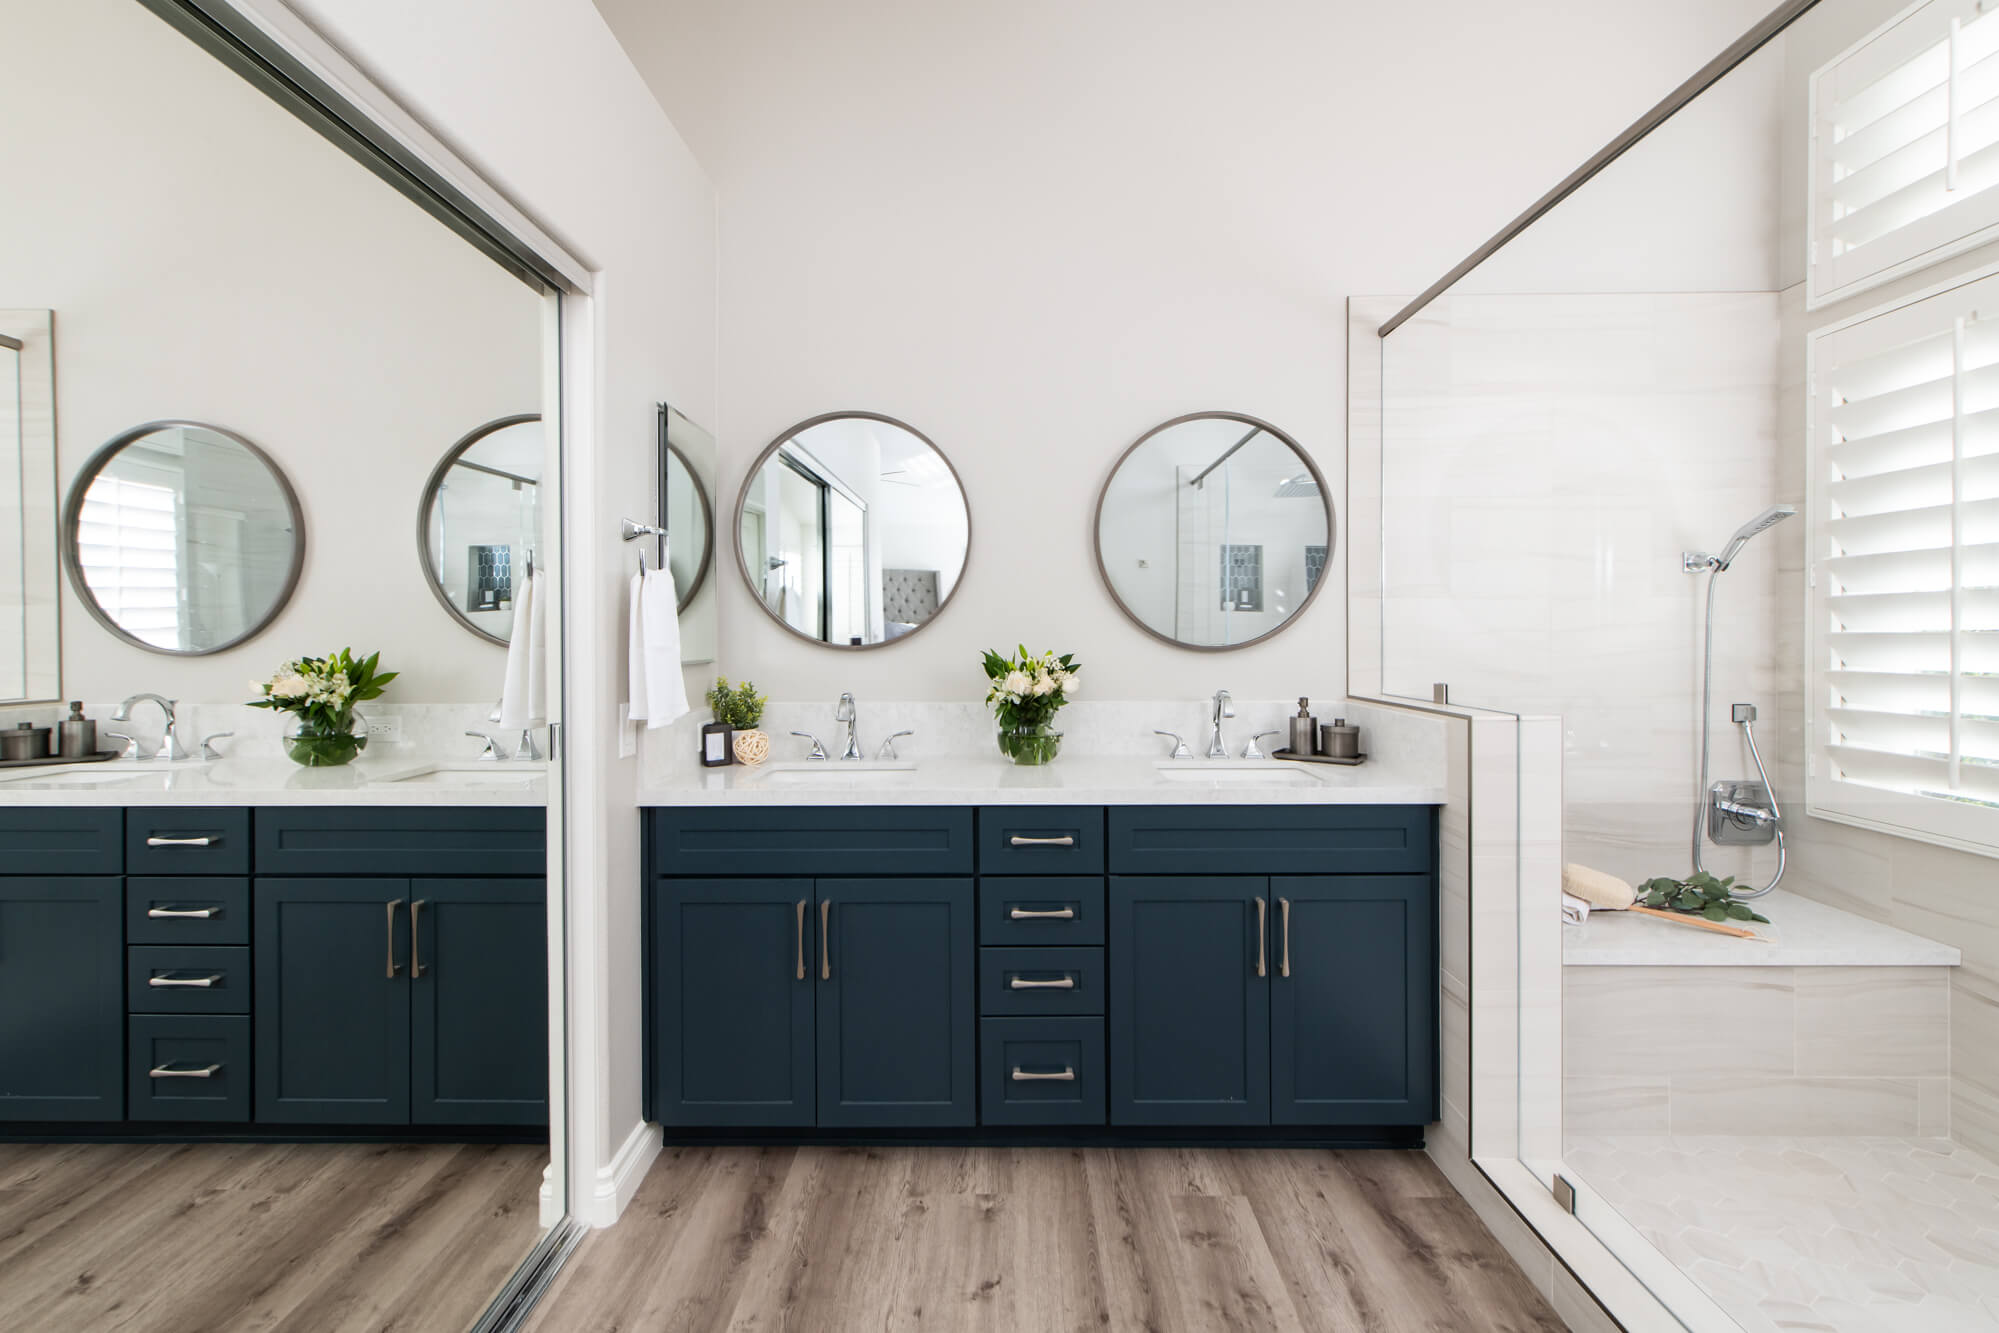 Foothill Ranch master bathroom remodel with farmhouse design - bring color into your bathroom